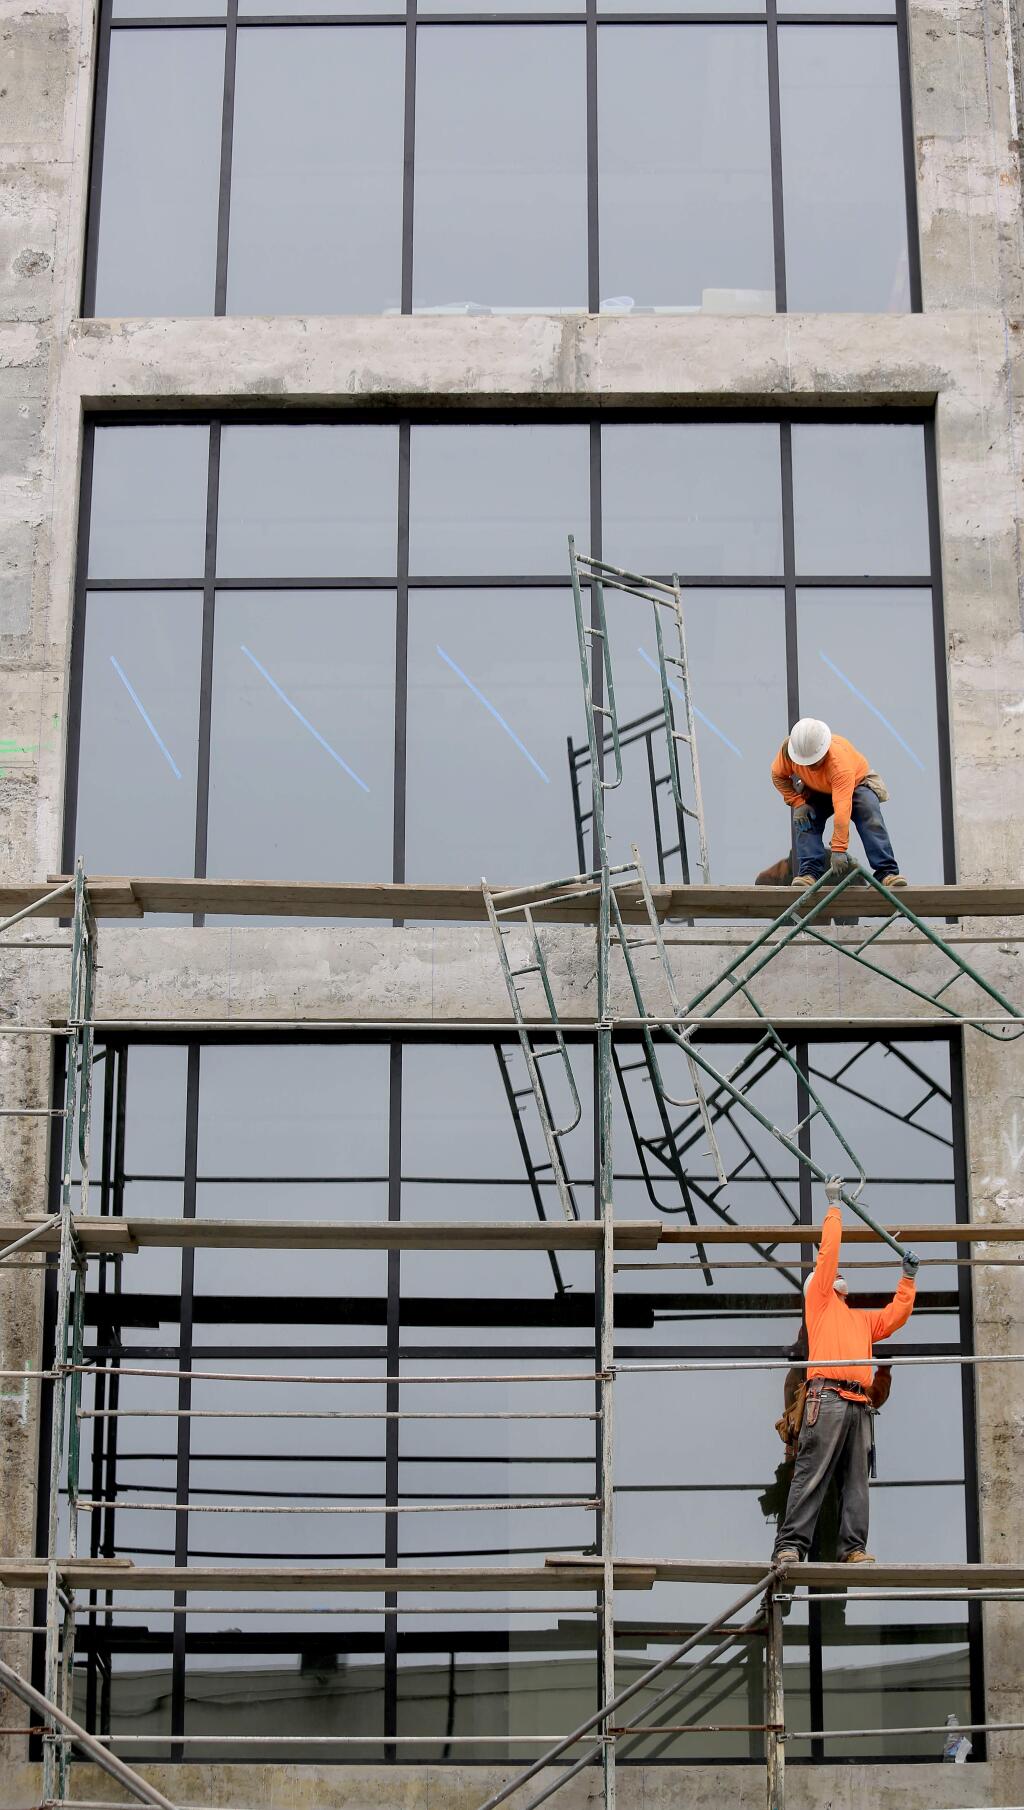 Scaffolding comes down on the Museum on the Square at the old AT&T building on Third Street in Santa Rosa, Tuesday May 19, revealing a new facade and windows. (Kent Porter / Press Democrat) 2015